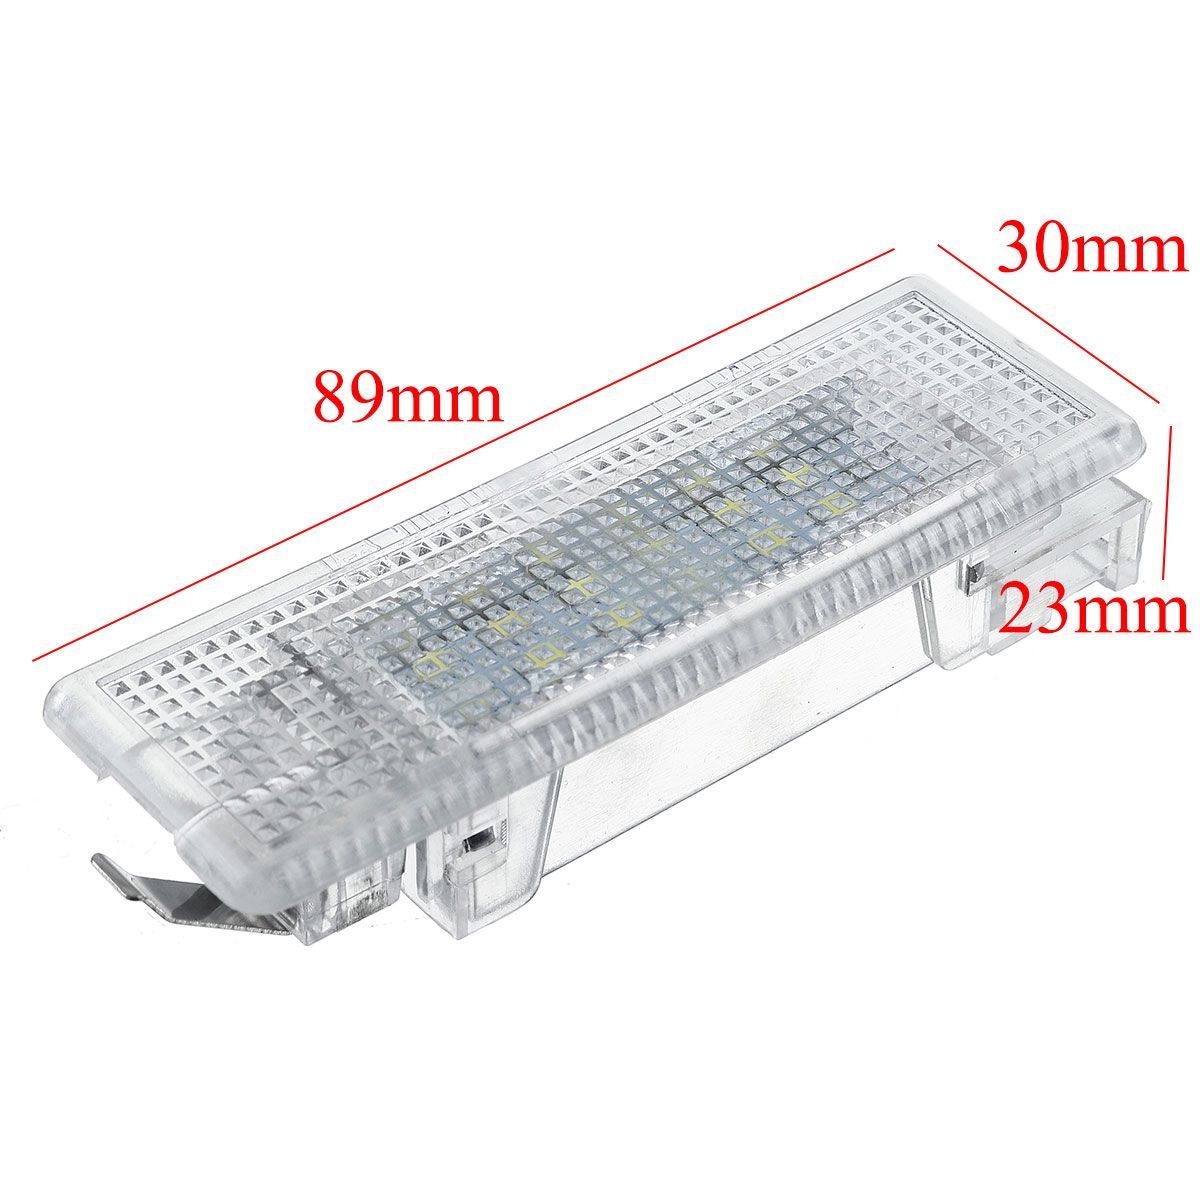 LED-Luggage-Trunk-Boot-Light-Tailgate-Lamp-For-VW-Caddy-Golf-MK4-Tiguan-Seat-1720162